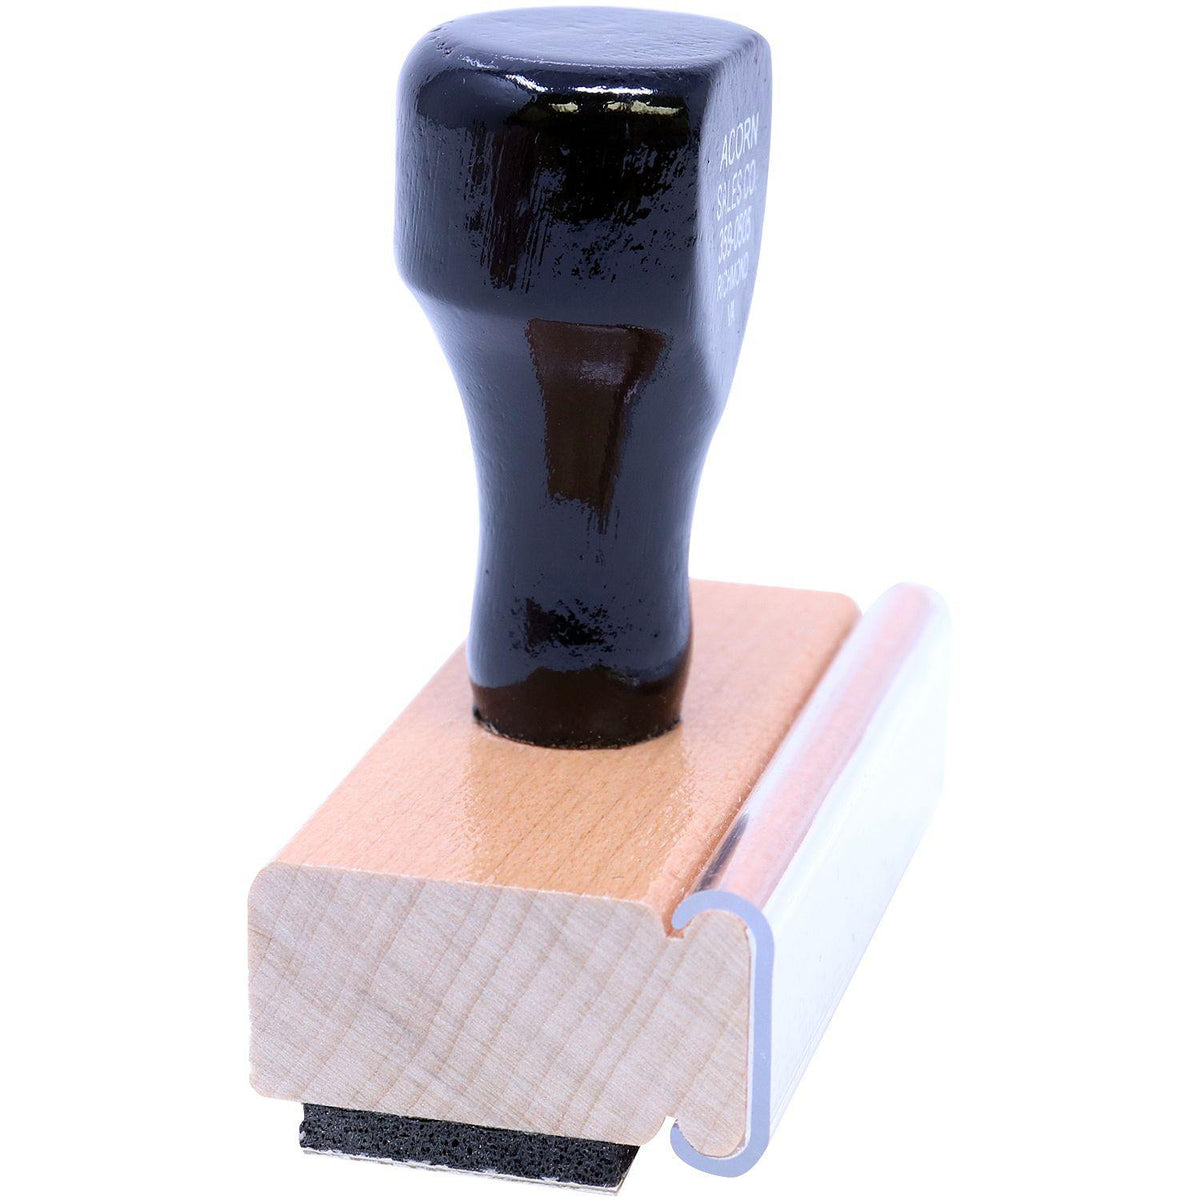 Side View of Large Returned Not Paid Rubber Stamp at an Angle